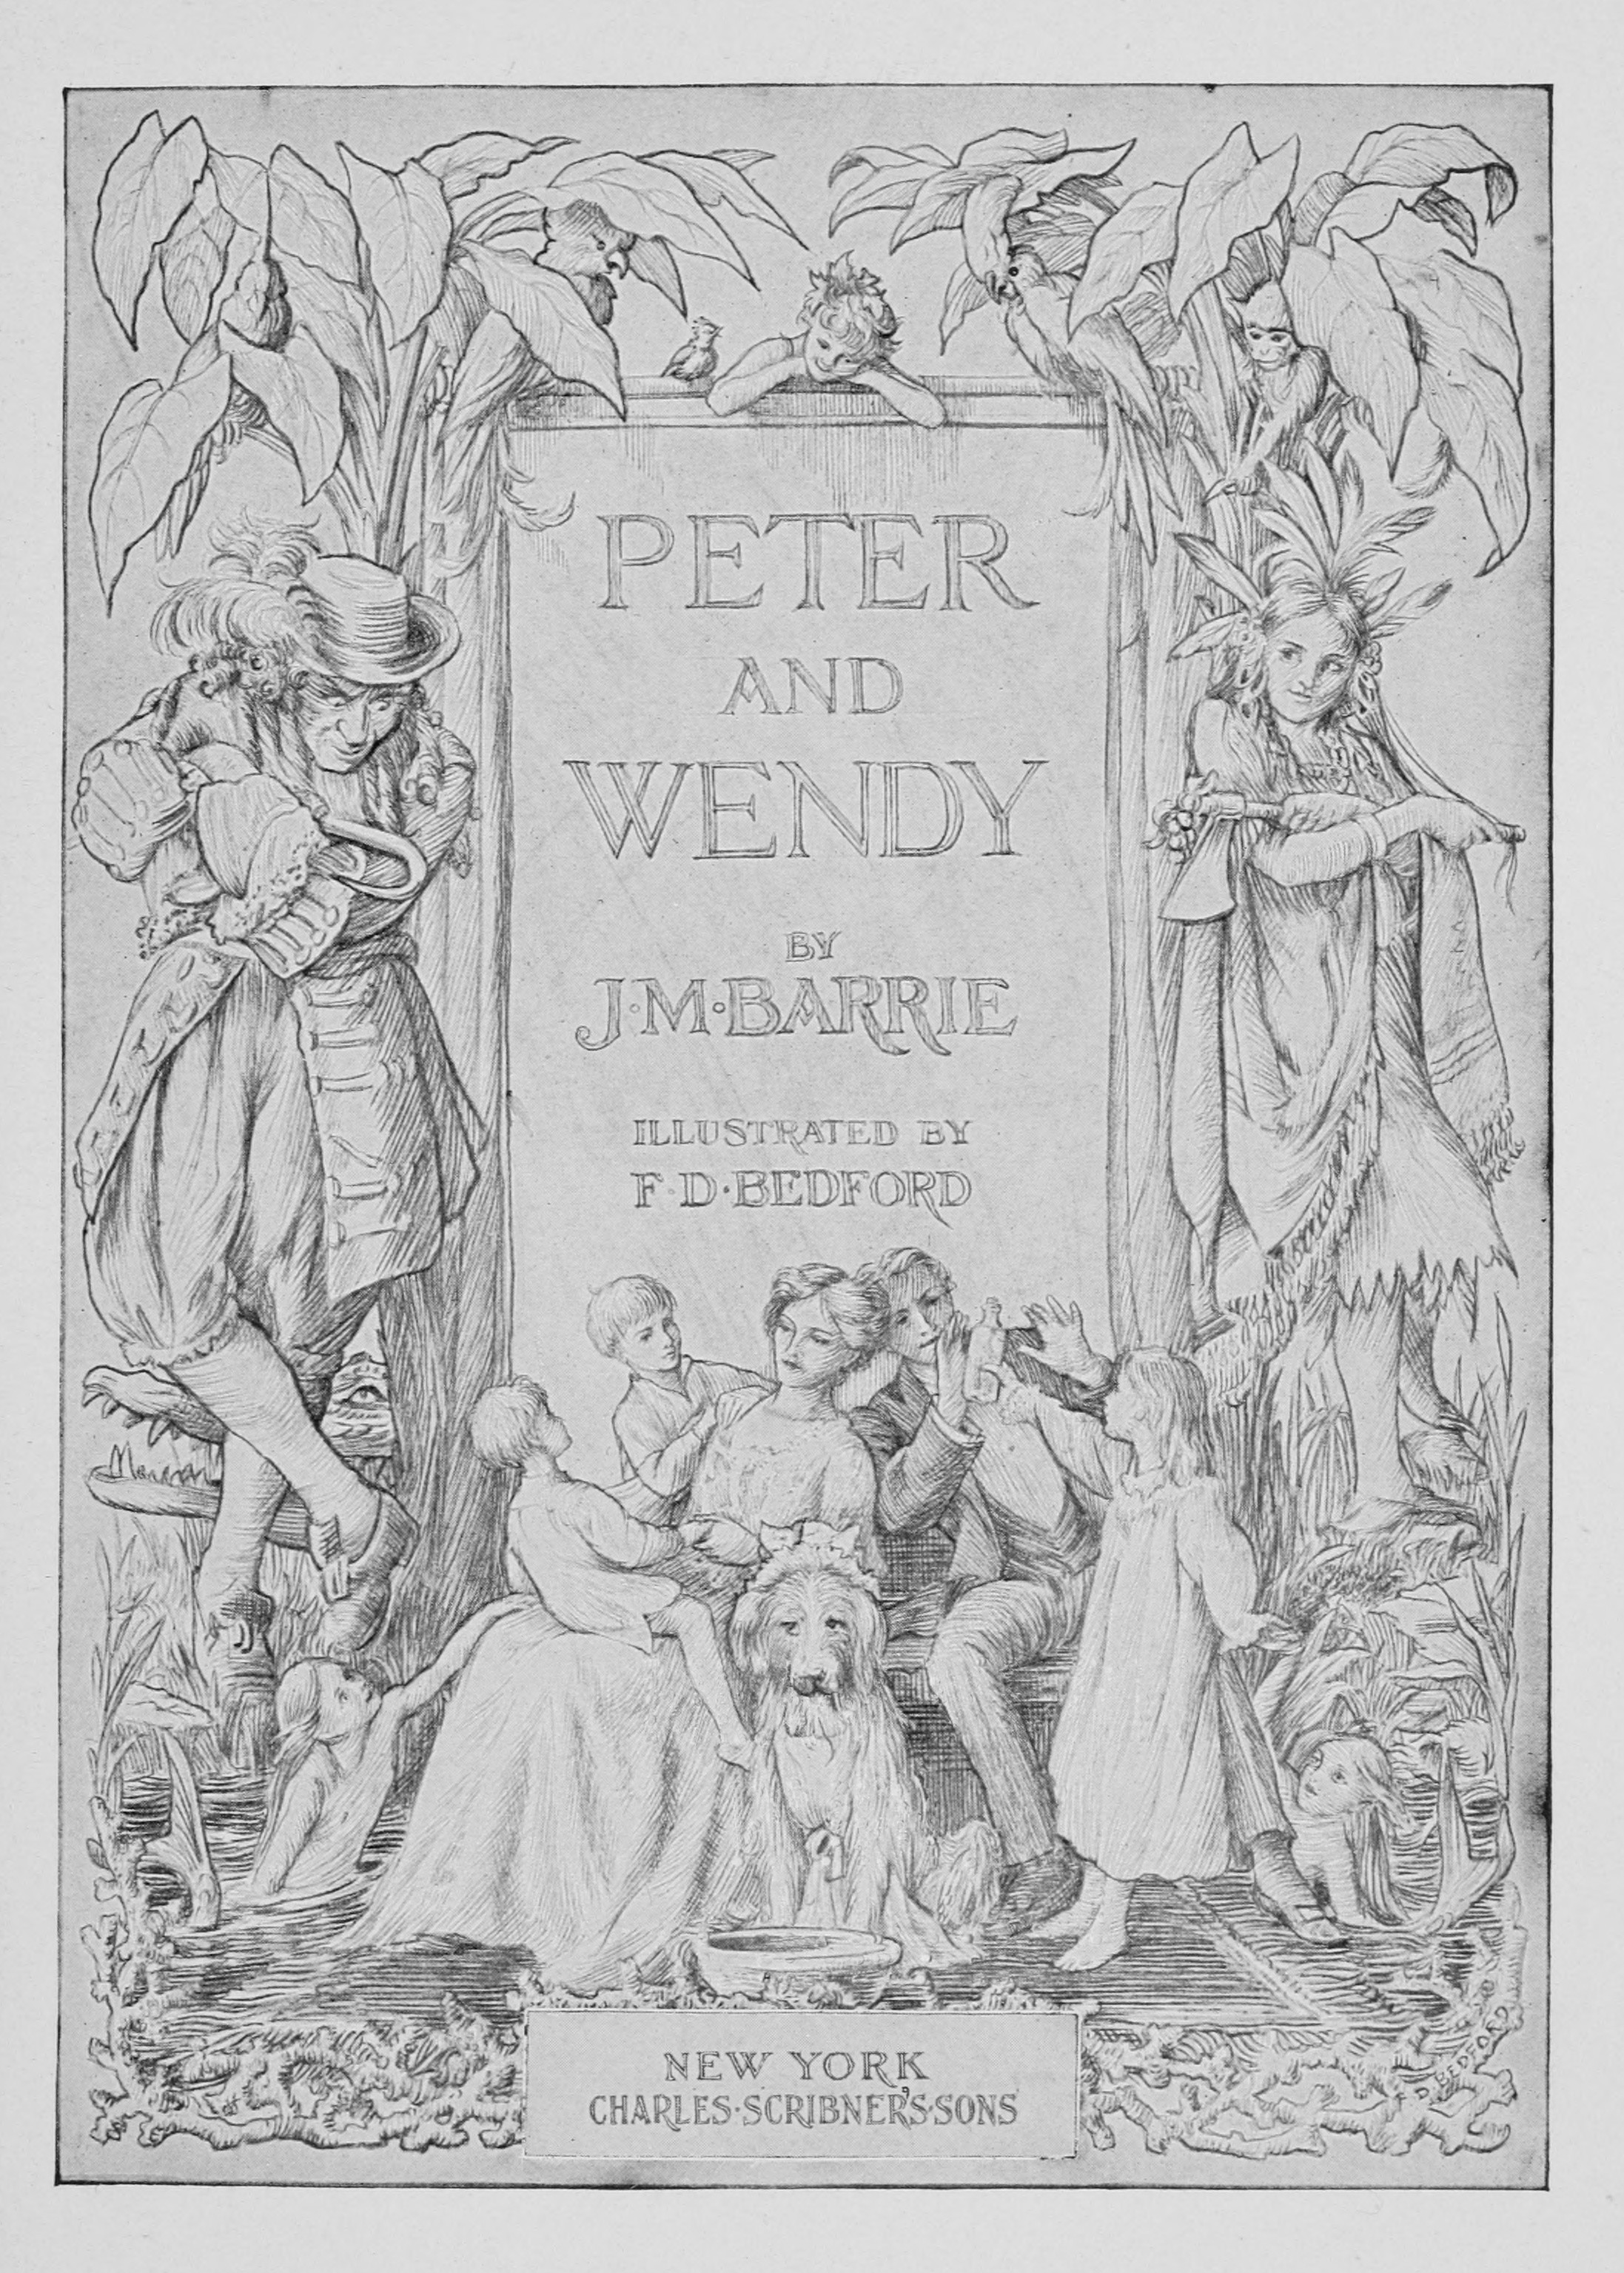 Title details for Peter Pan by J.M. Barrie - Available